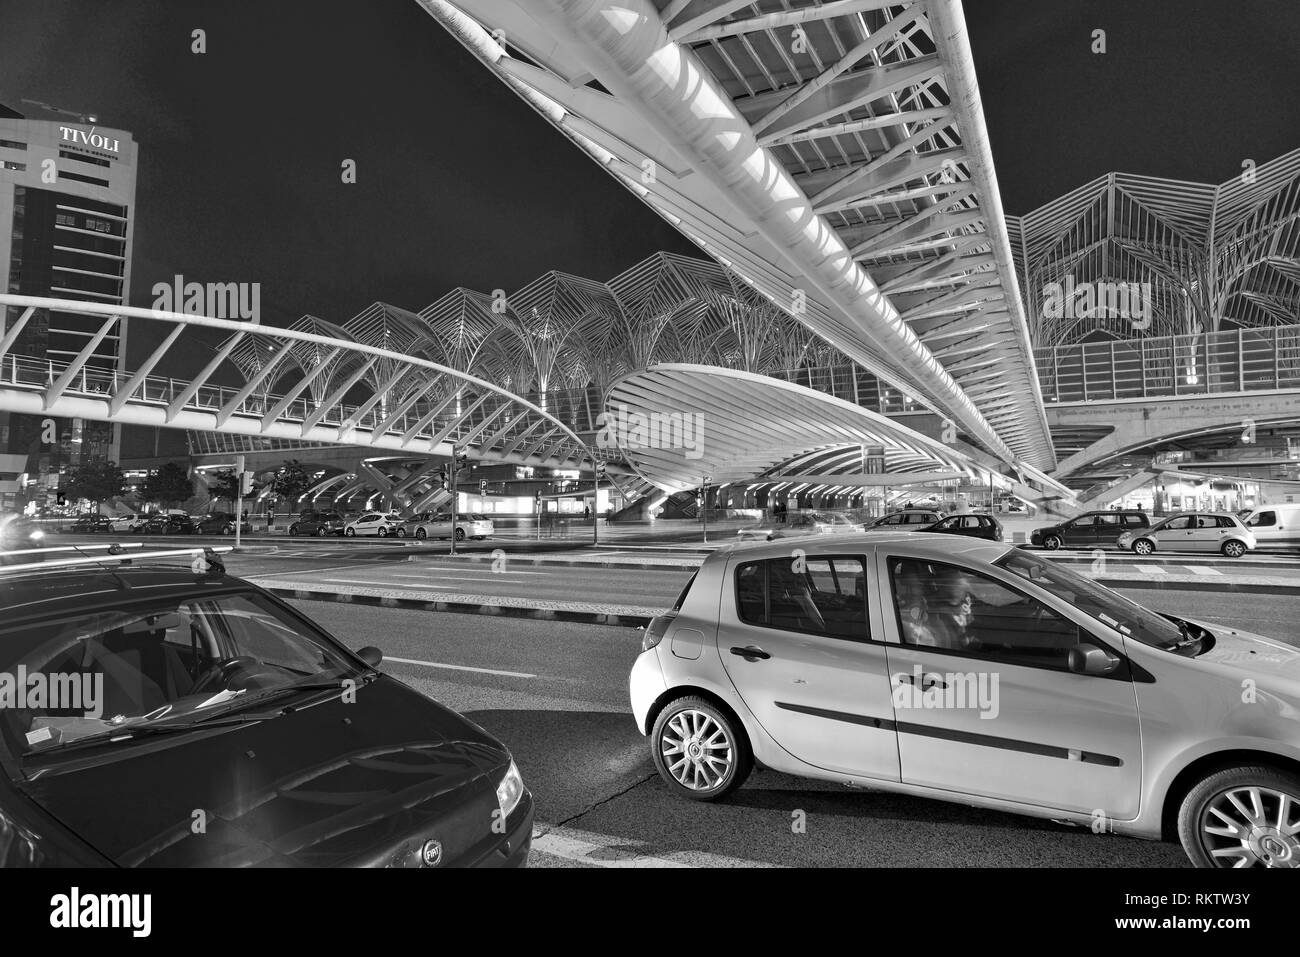 Evening traffic in large road with futuristic steel roof and bridge Stock Photo